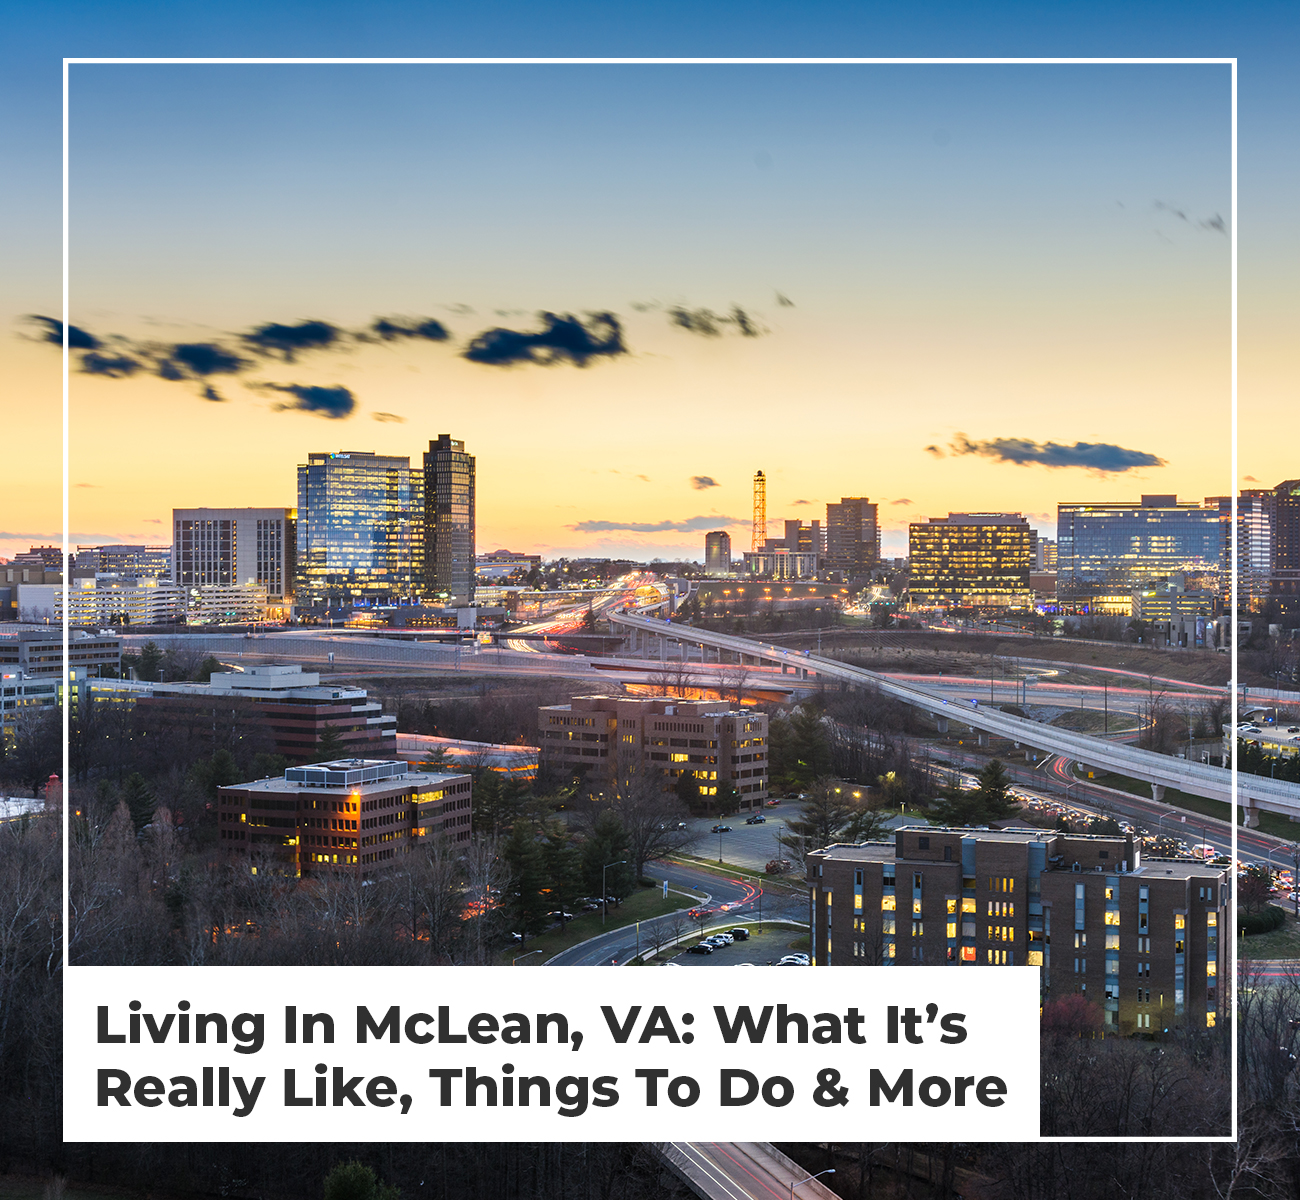 Living In McLean, VA: What It's Really Like, Things To Do & More - Main Image